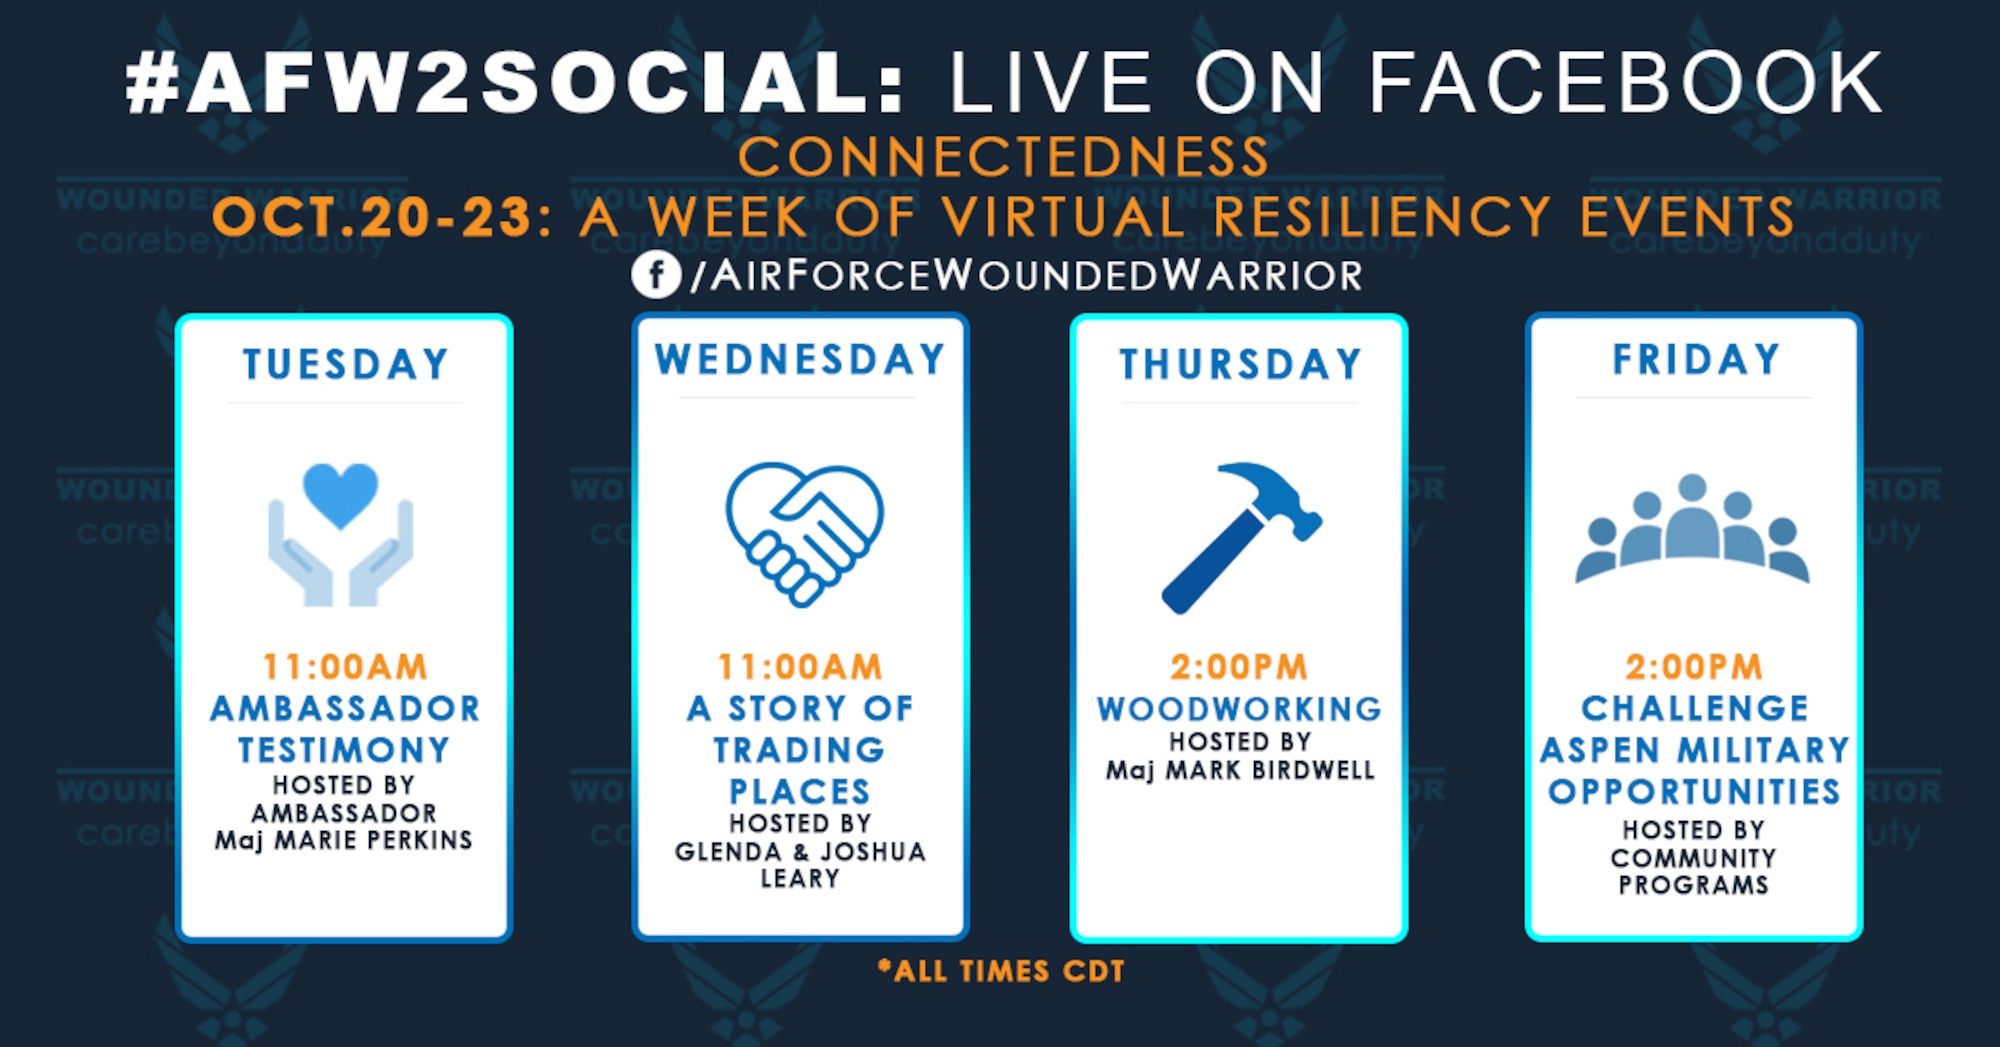 Weekly live events for social media, 20-23 October. (U.S. Air Force Graphic by Melissa Espinales)